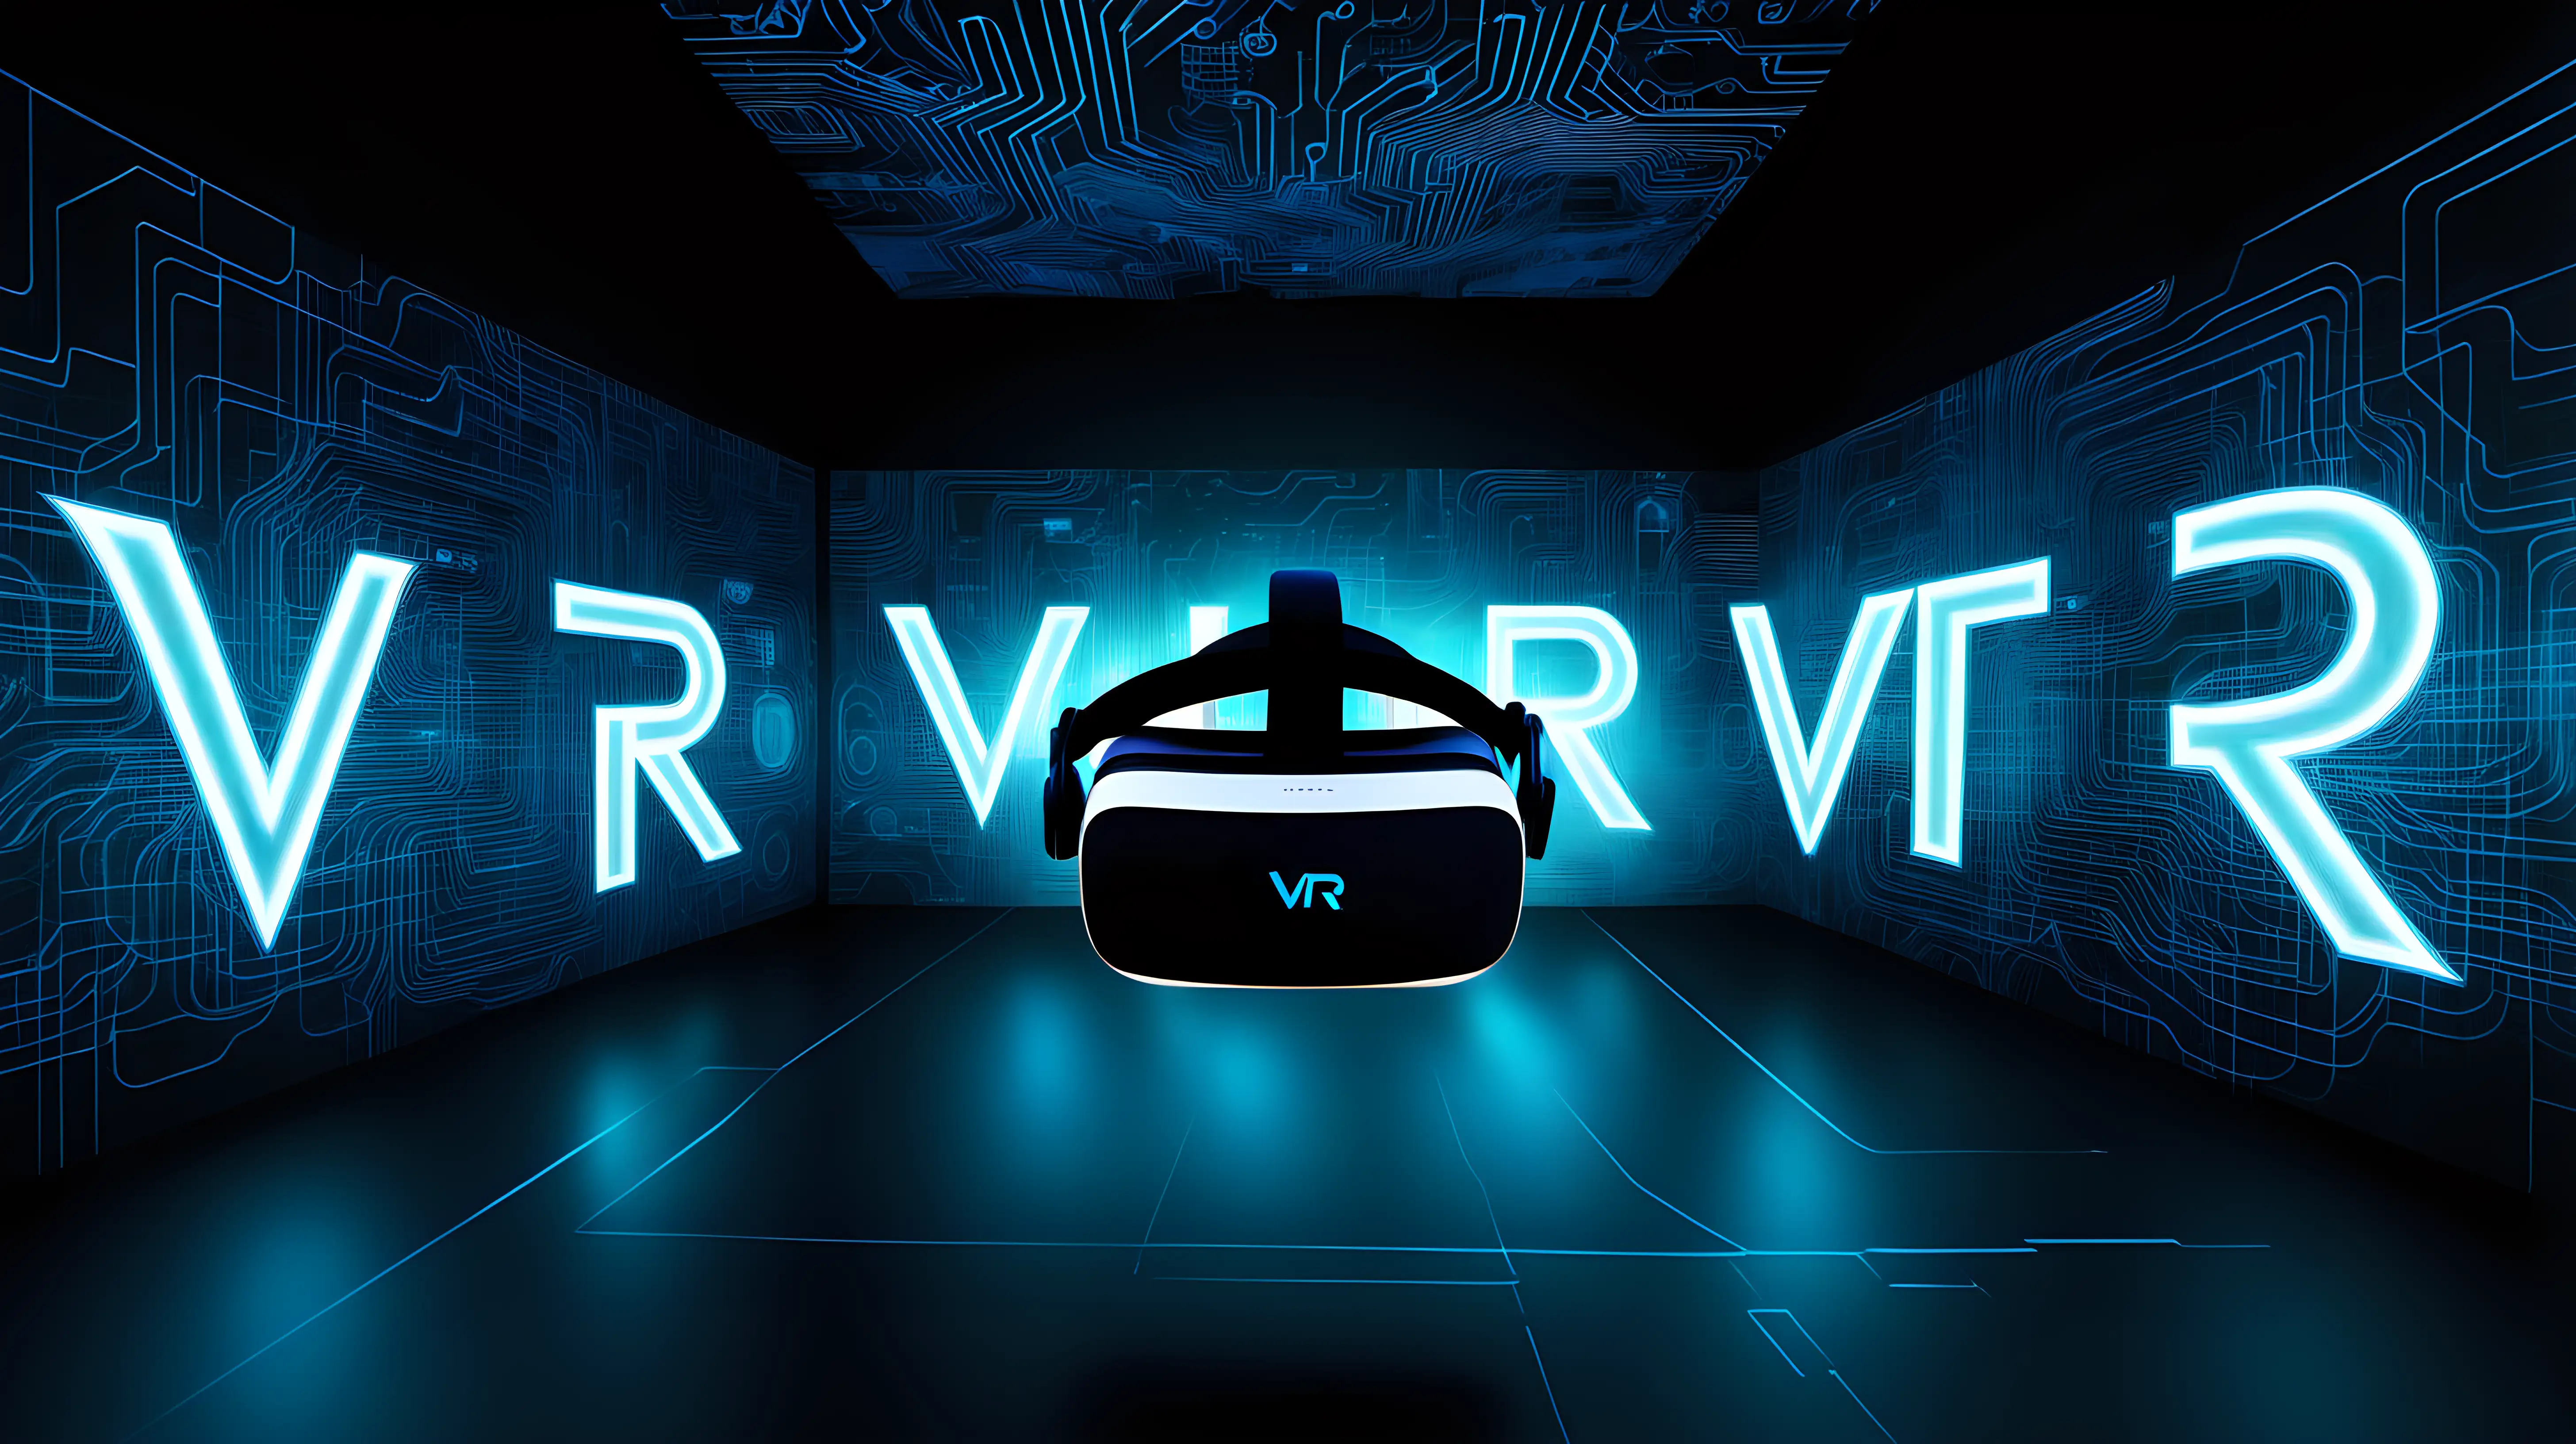 Futuristic VR Technology Illustration in Glowing Circuit Patterns